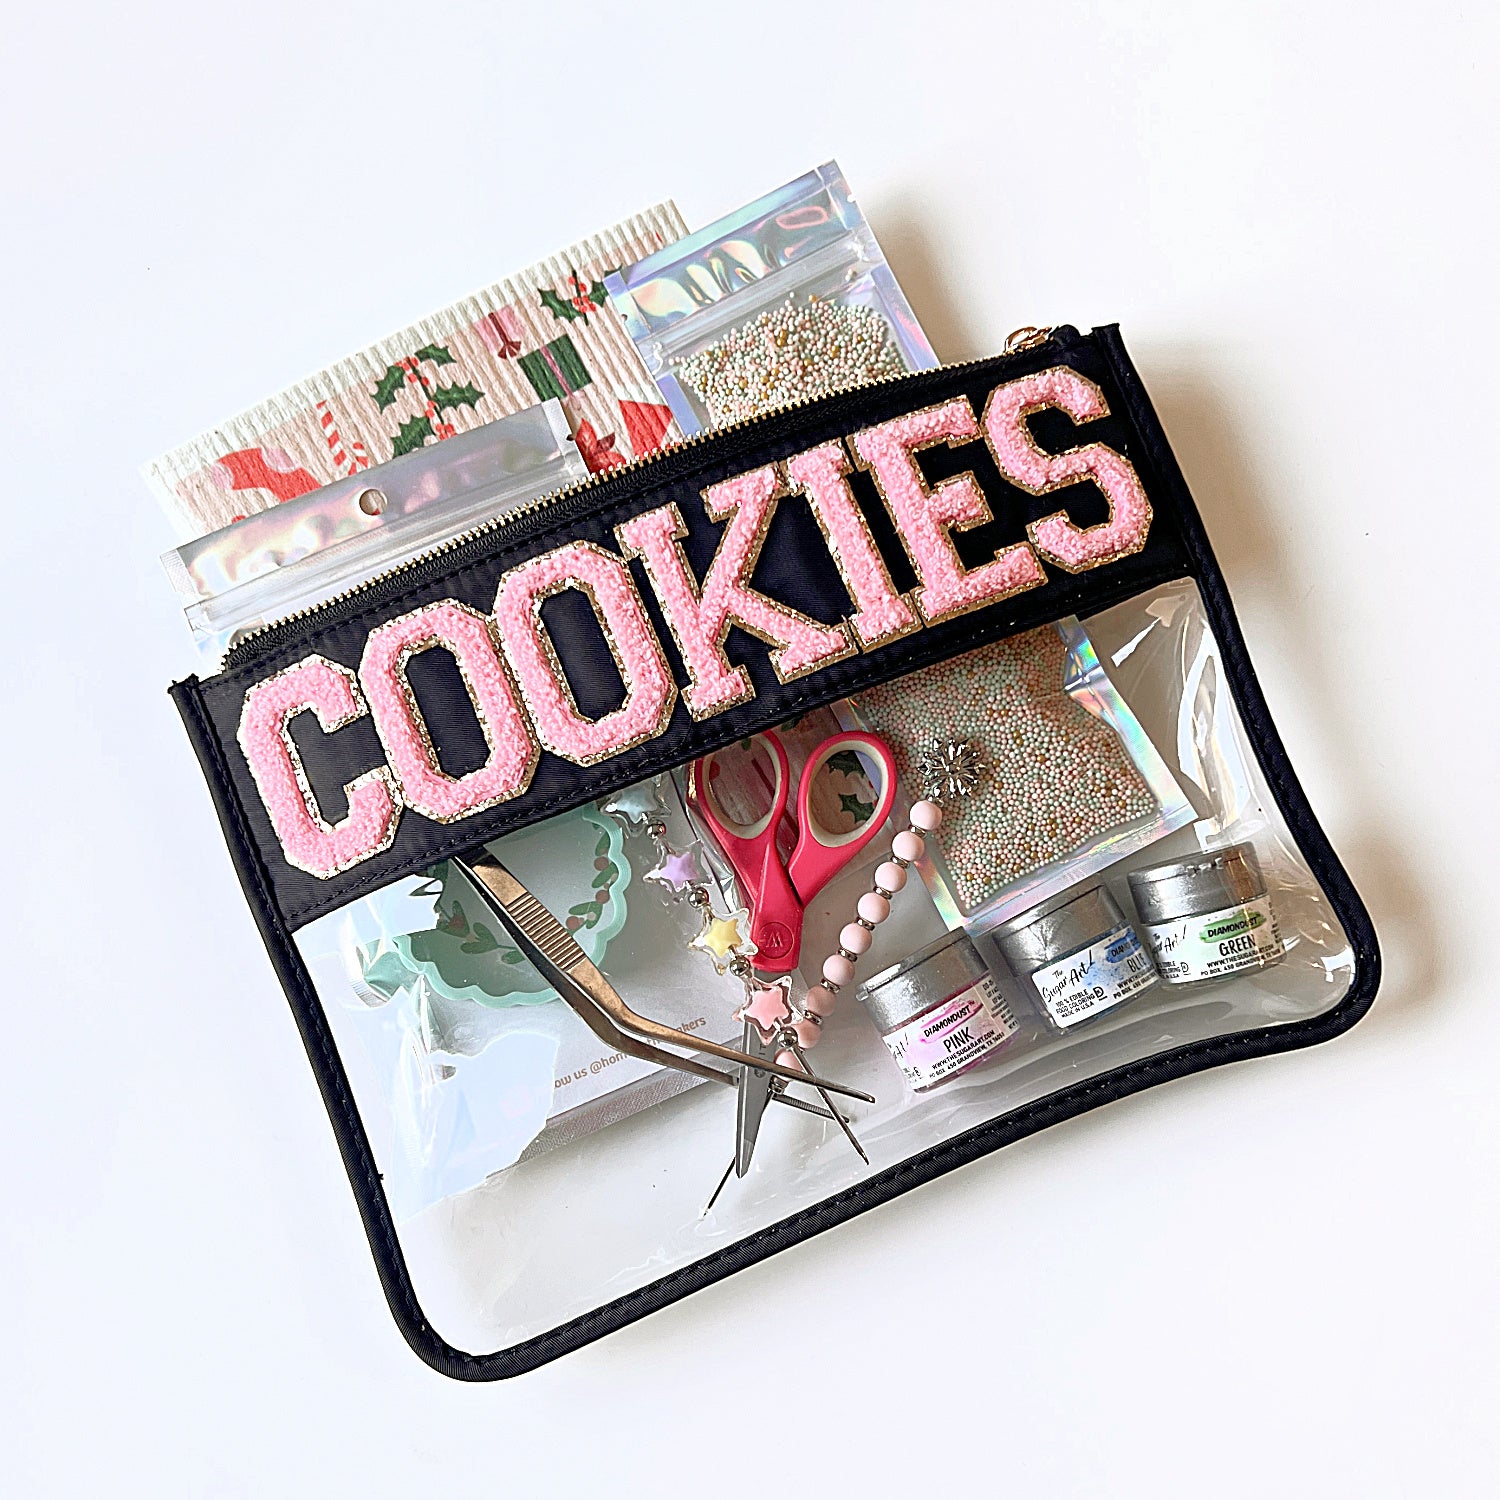 Handmade COOKIES Patches Clear Zip Pouch